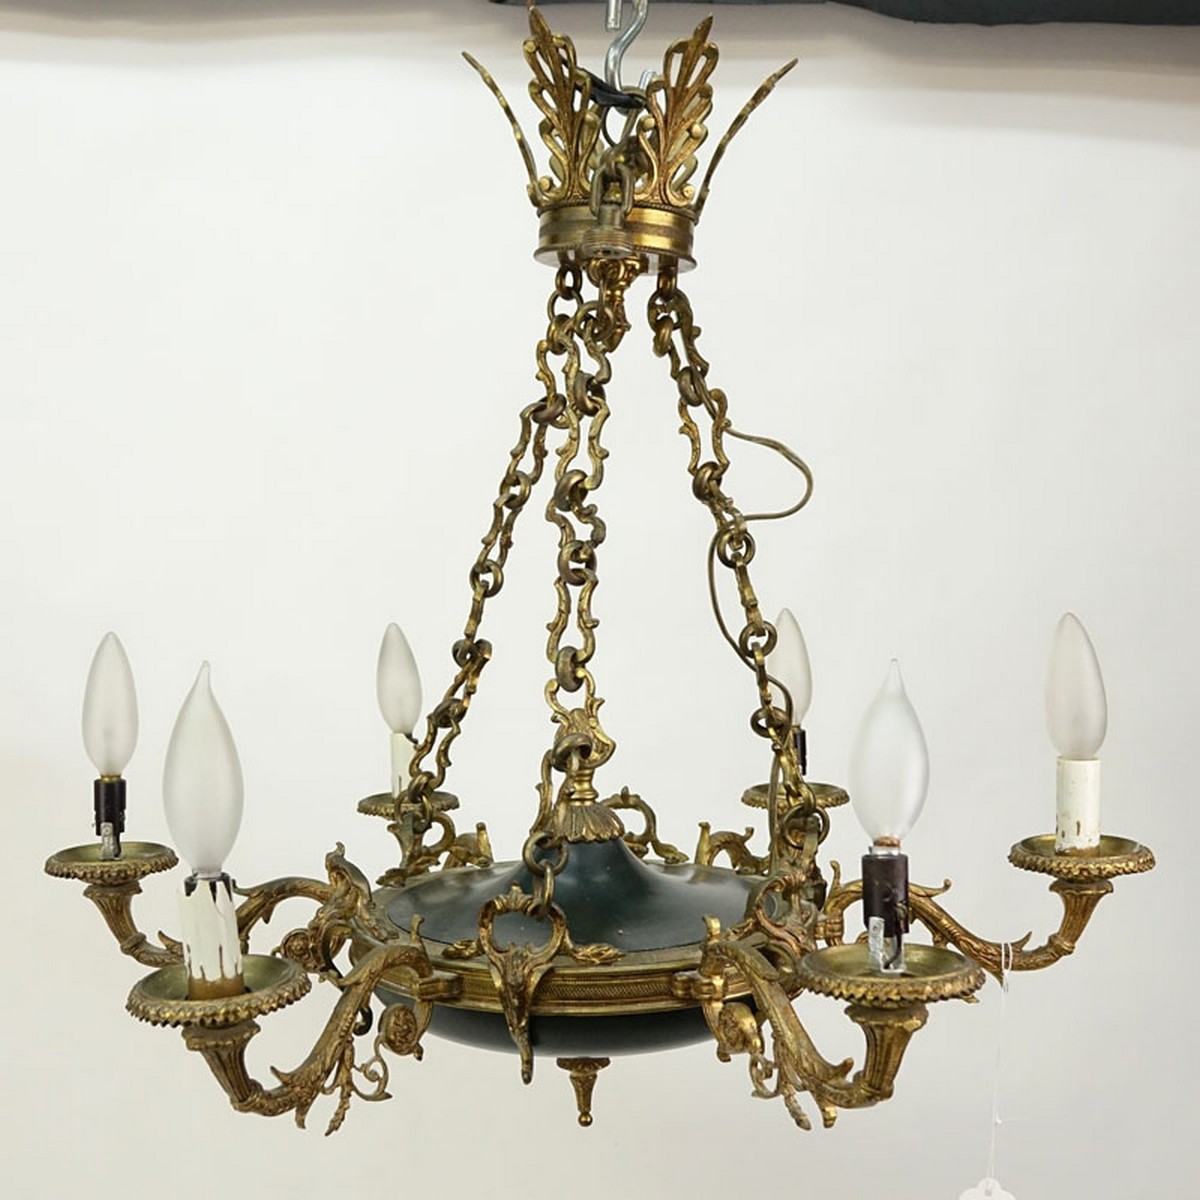 19/20th Century Empire Style Six-Light Gilt Brass and Tole Chandelier.  Rubbing to gilt, losses to light cover.